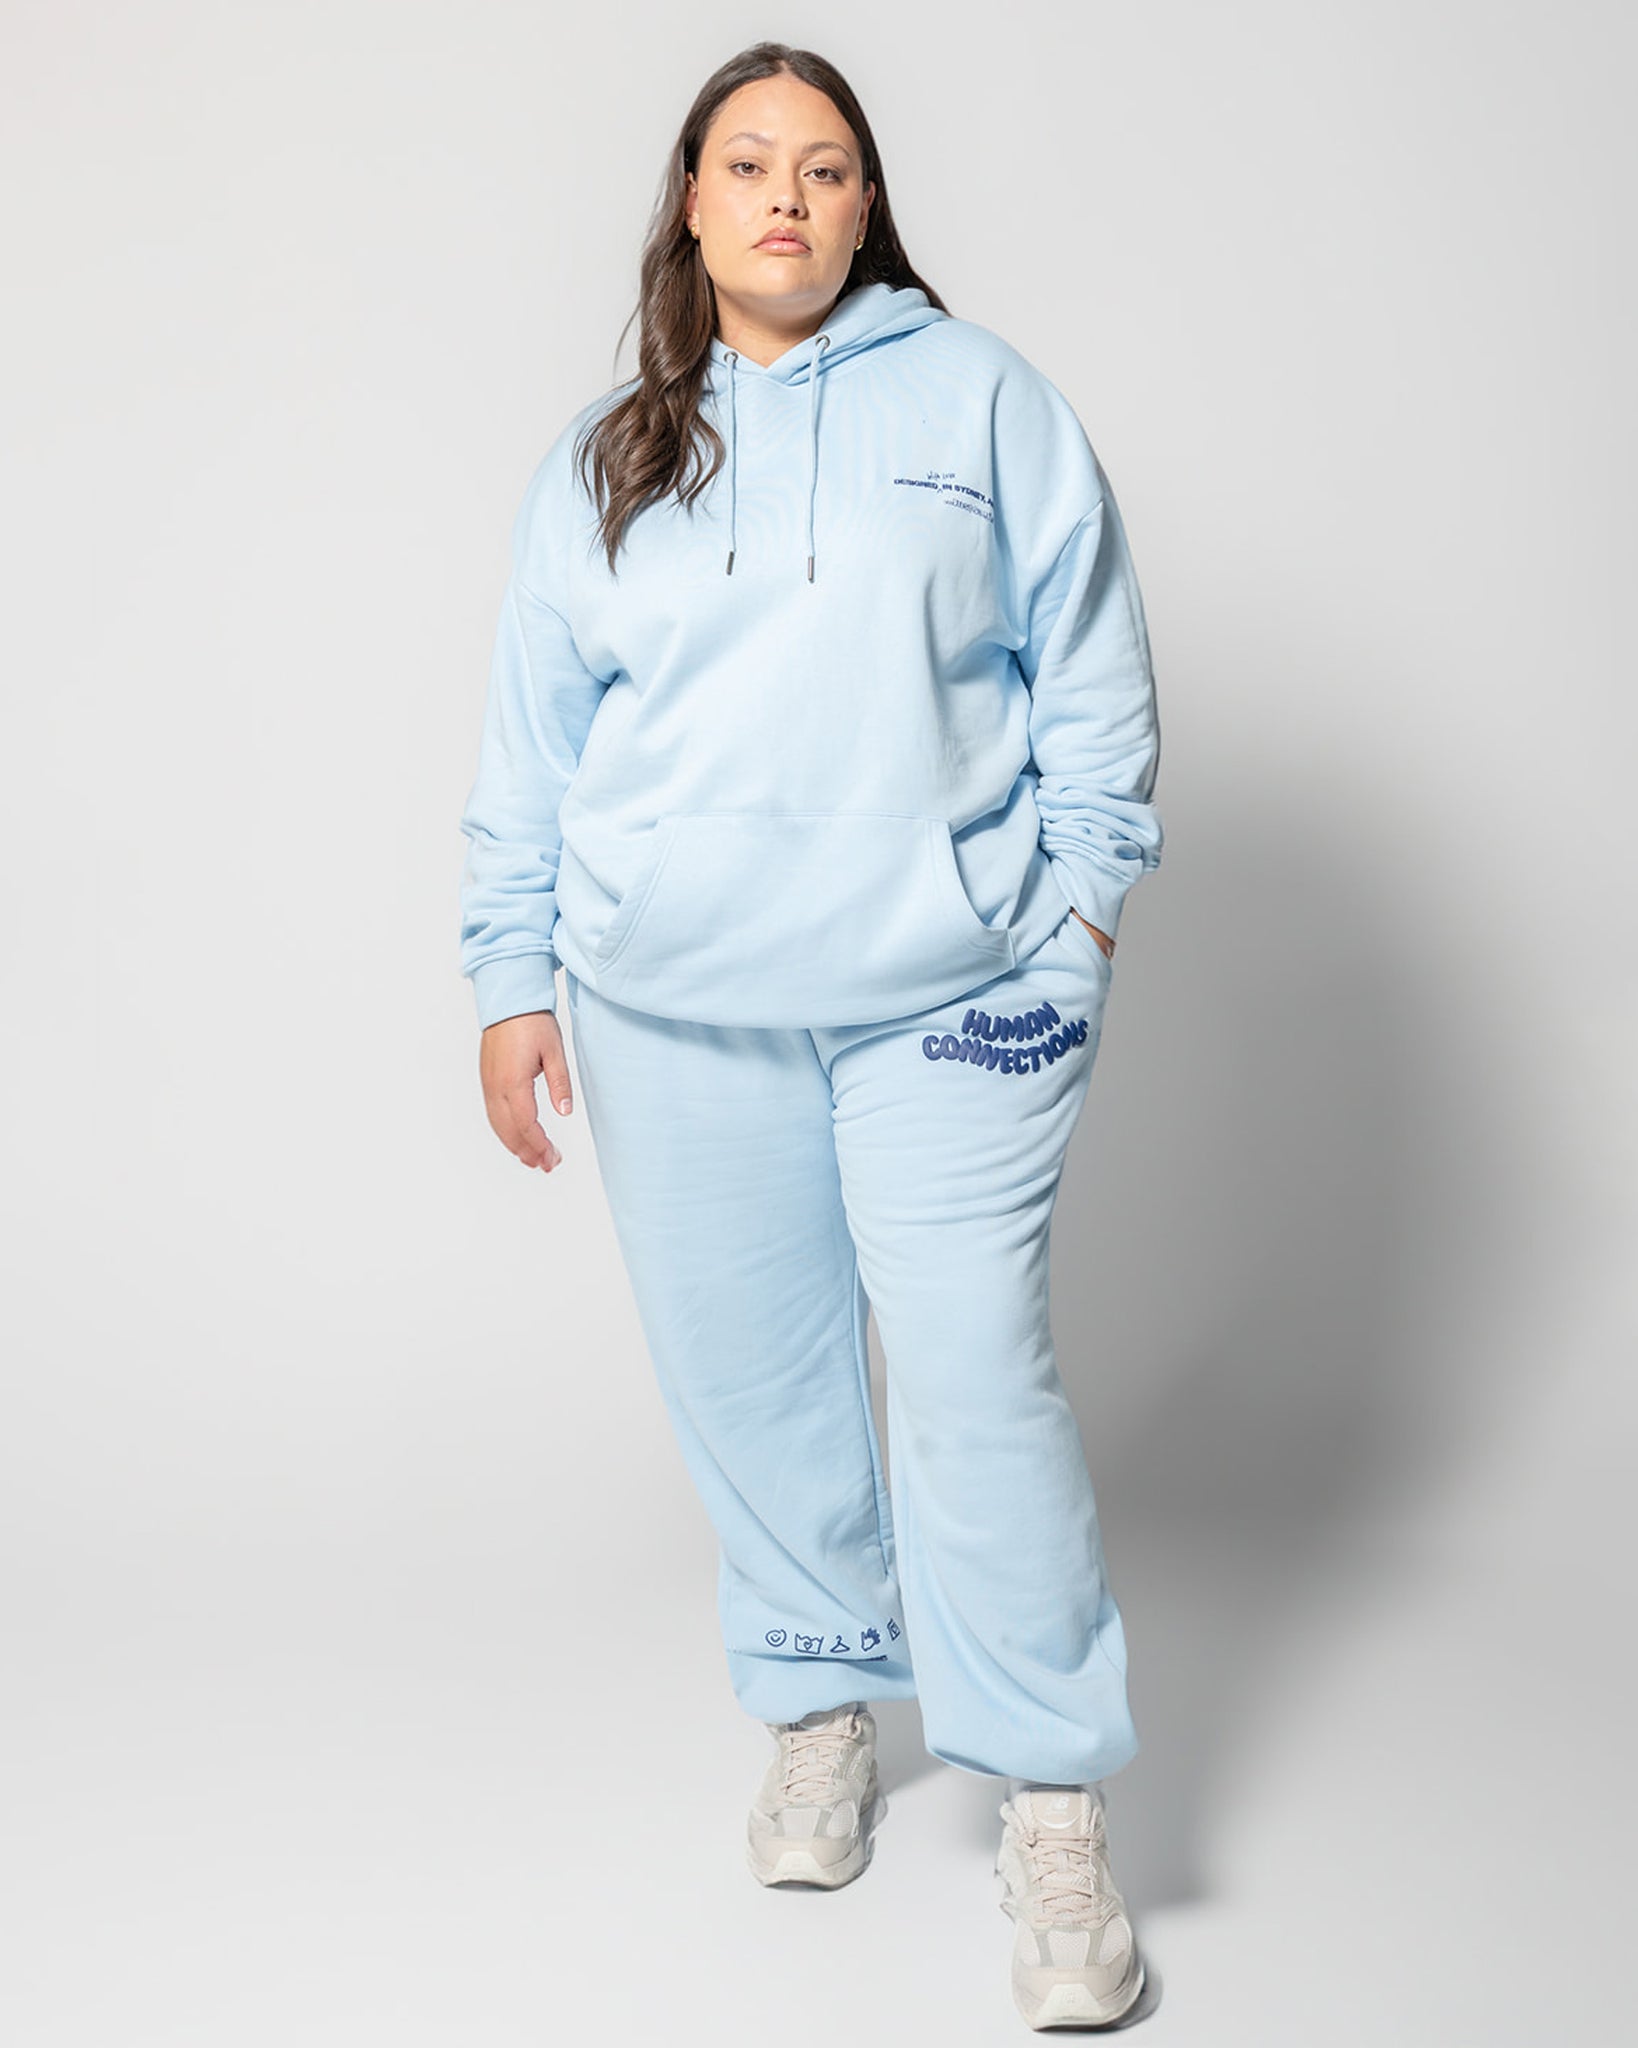 Human Connection Trackpant - Blue Mist